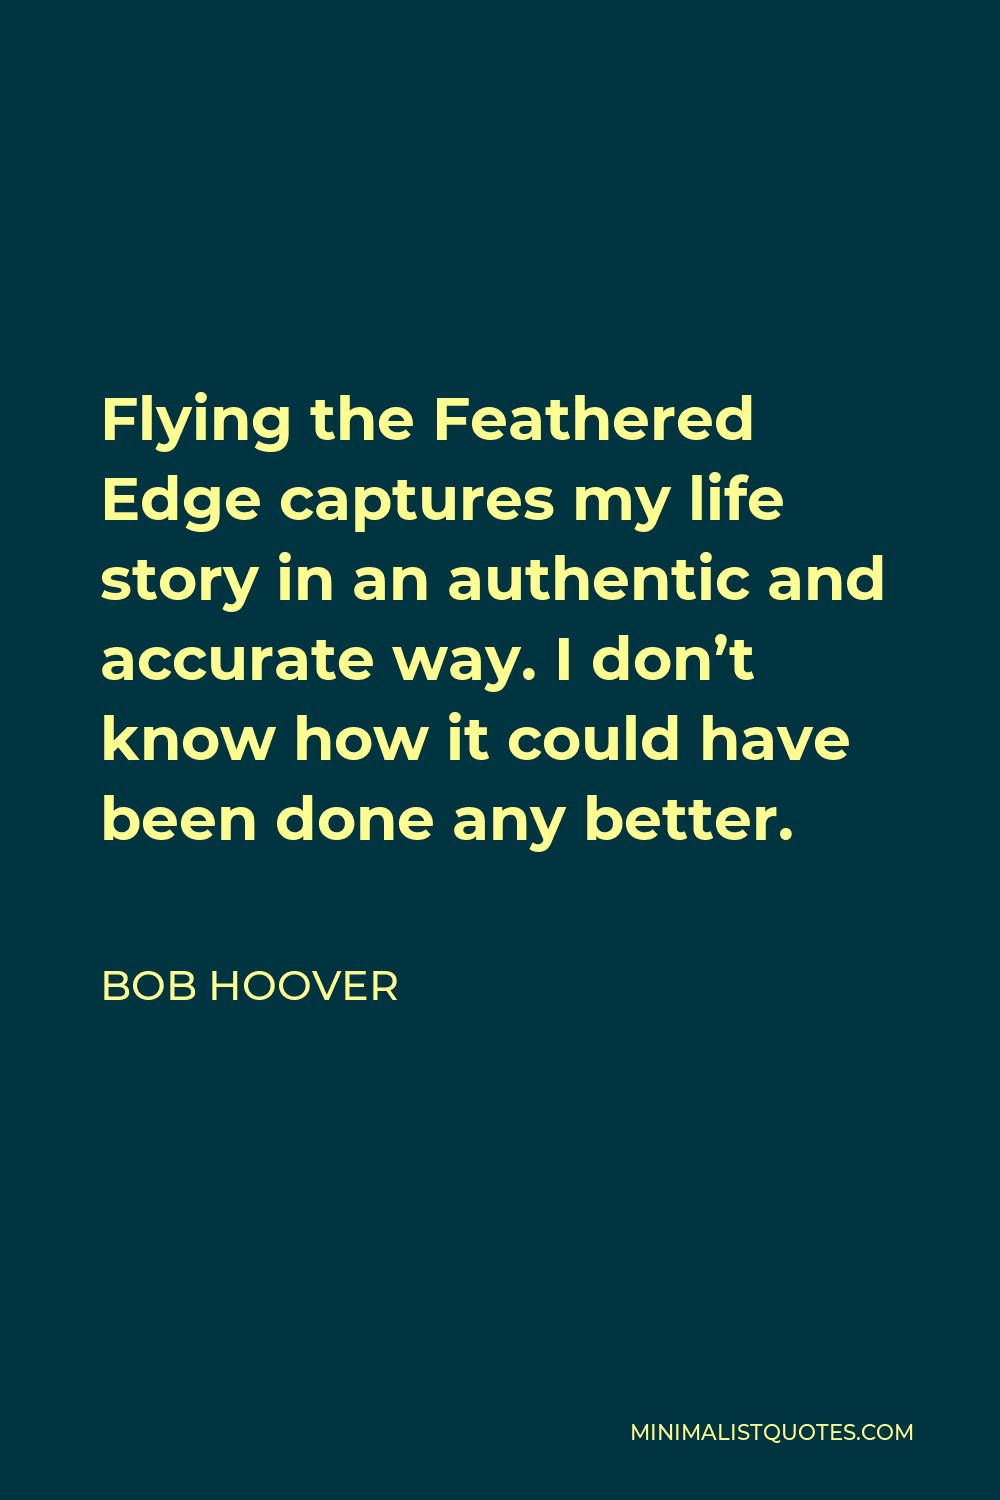 Bob Hoover Quote - Flying the Feathered Edge captures my life story in an authentic and accurate way. I don’t know how it could have been done any better.